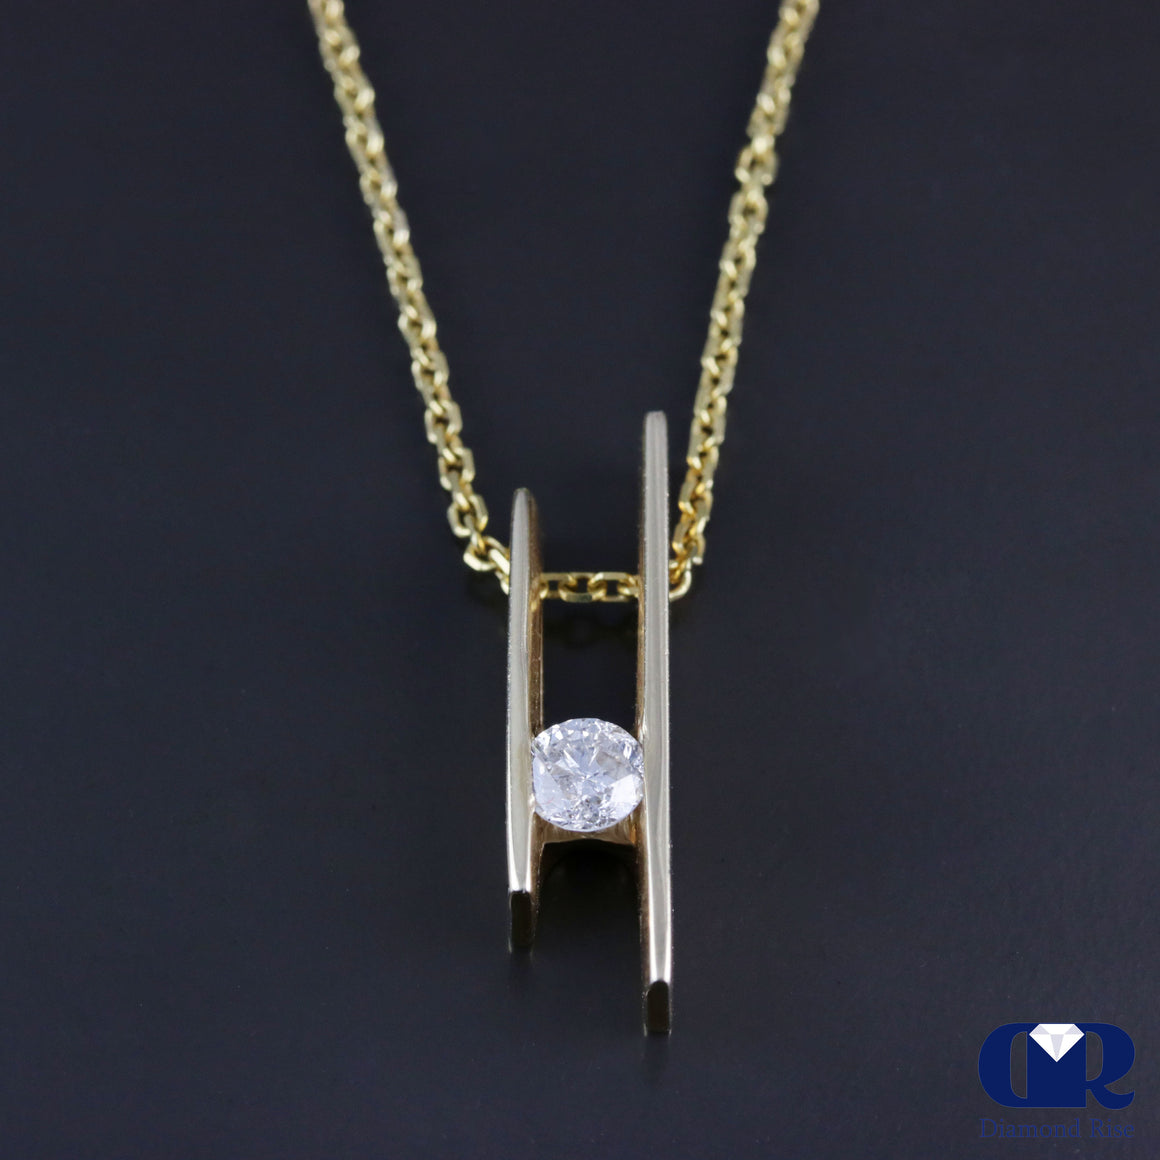 Round Cut Diamond Solitaire Pendant Necklace In 14K Yellow Gold - Diamond Rise Jewelry